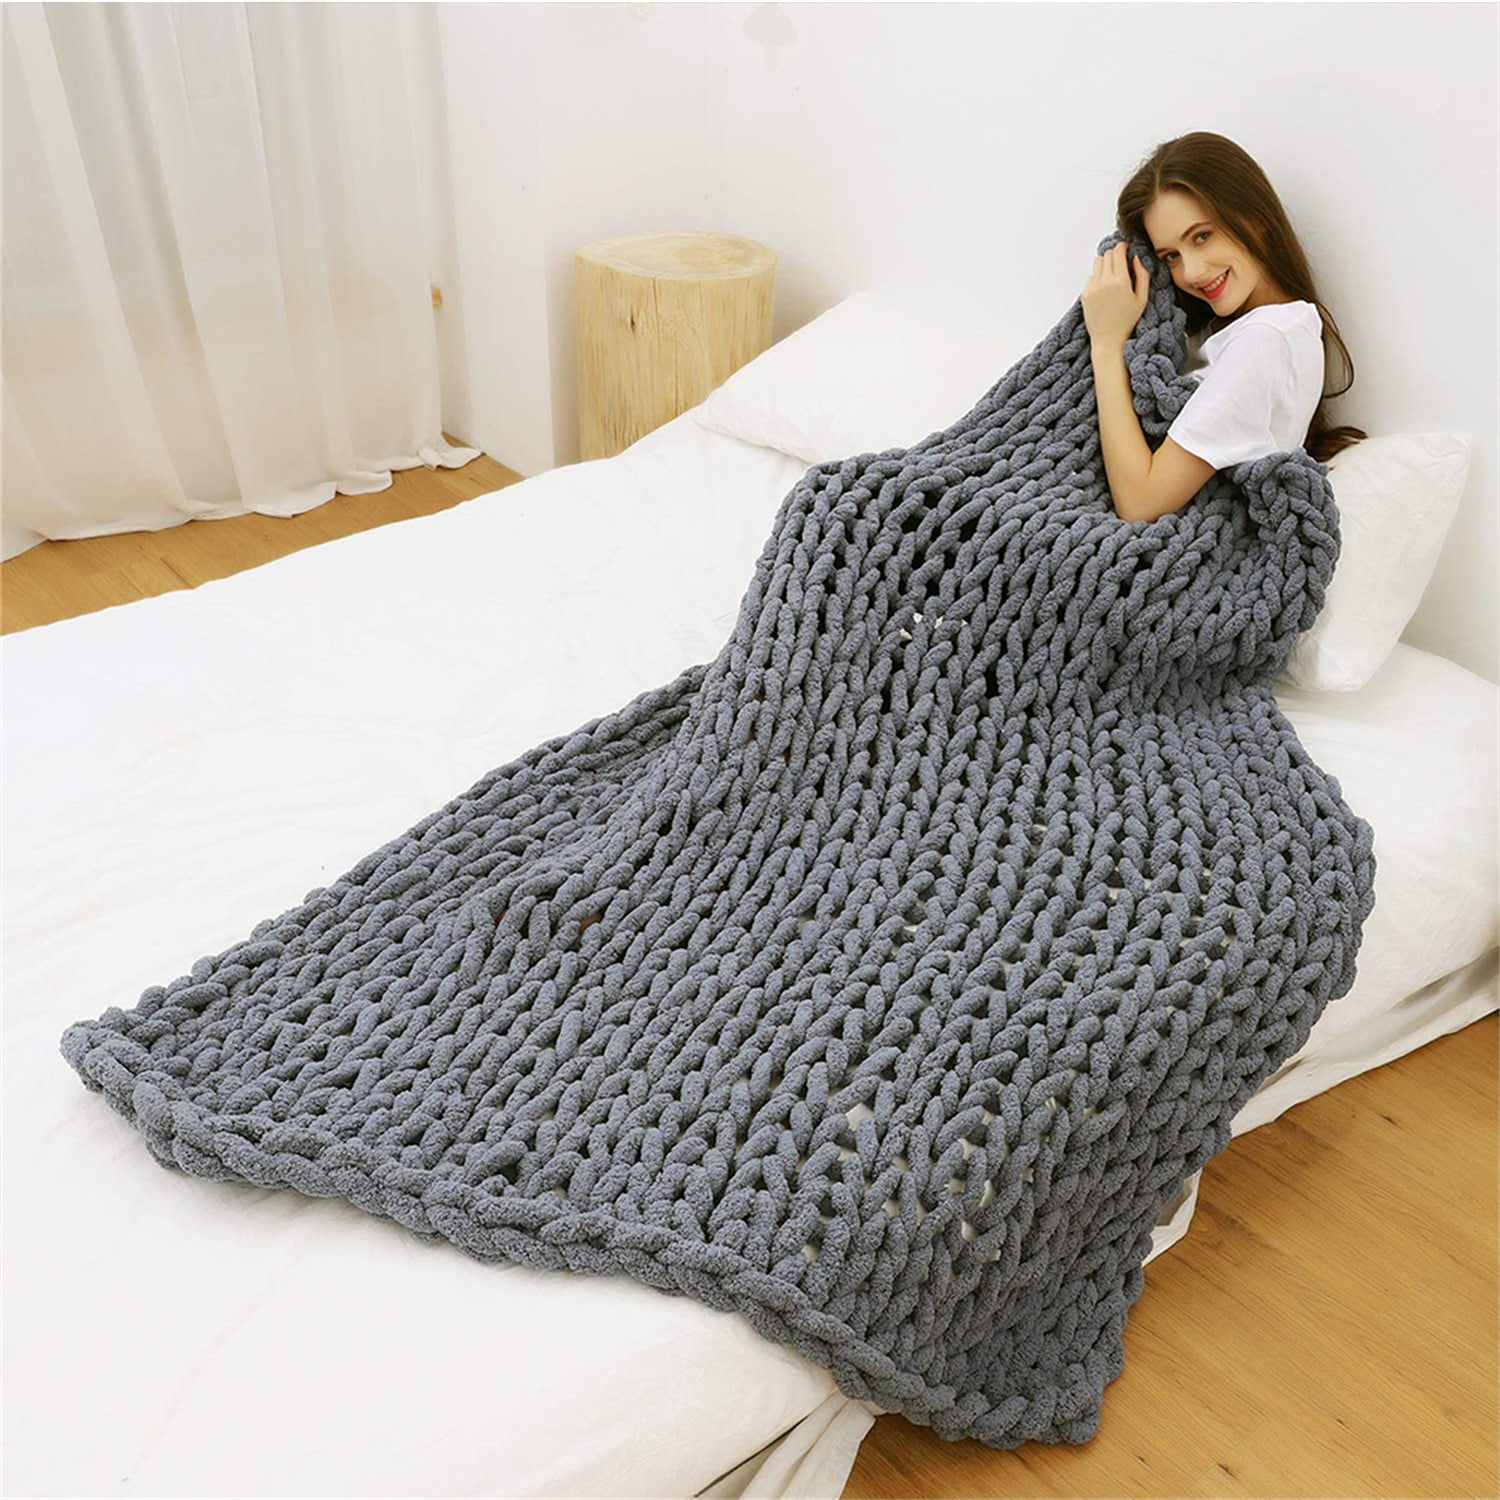 Maetoow Chenille Chunky Knit Blanket Throw （50×60 Inch）, Handmade Warm &  Cozy Blanket Couch, Bed, Home Decor, Soft Breathable Fleece Banket,  Christmas